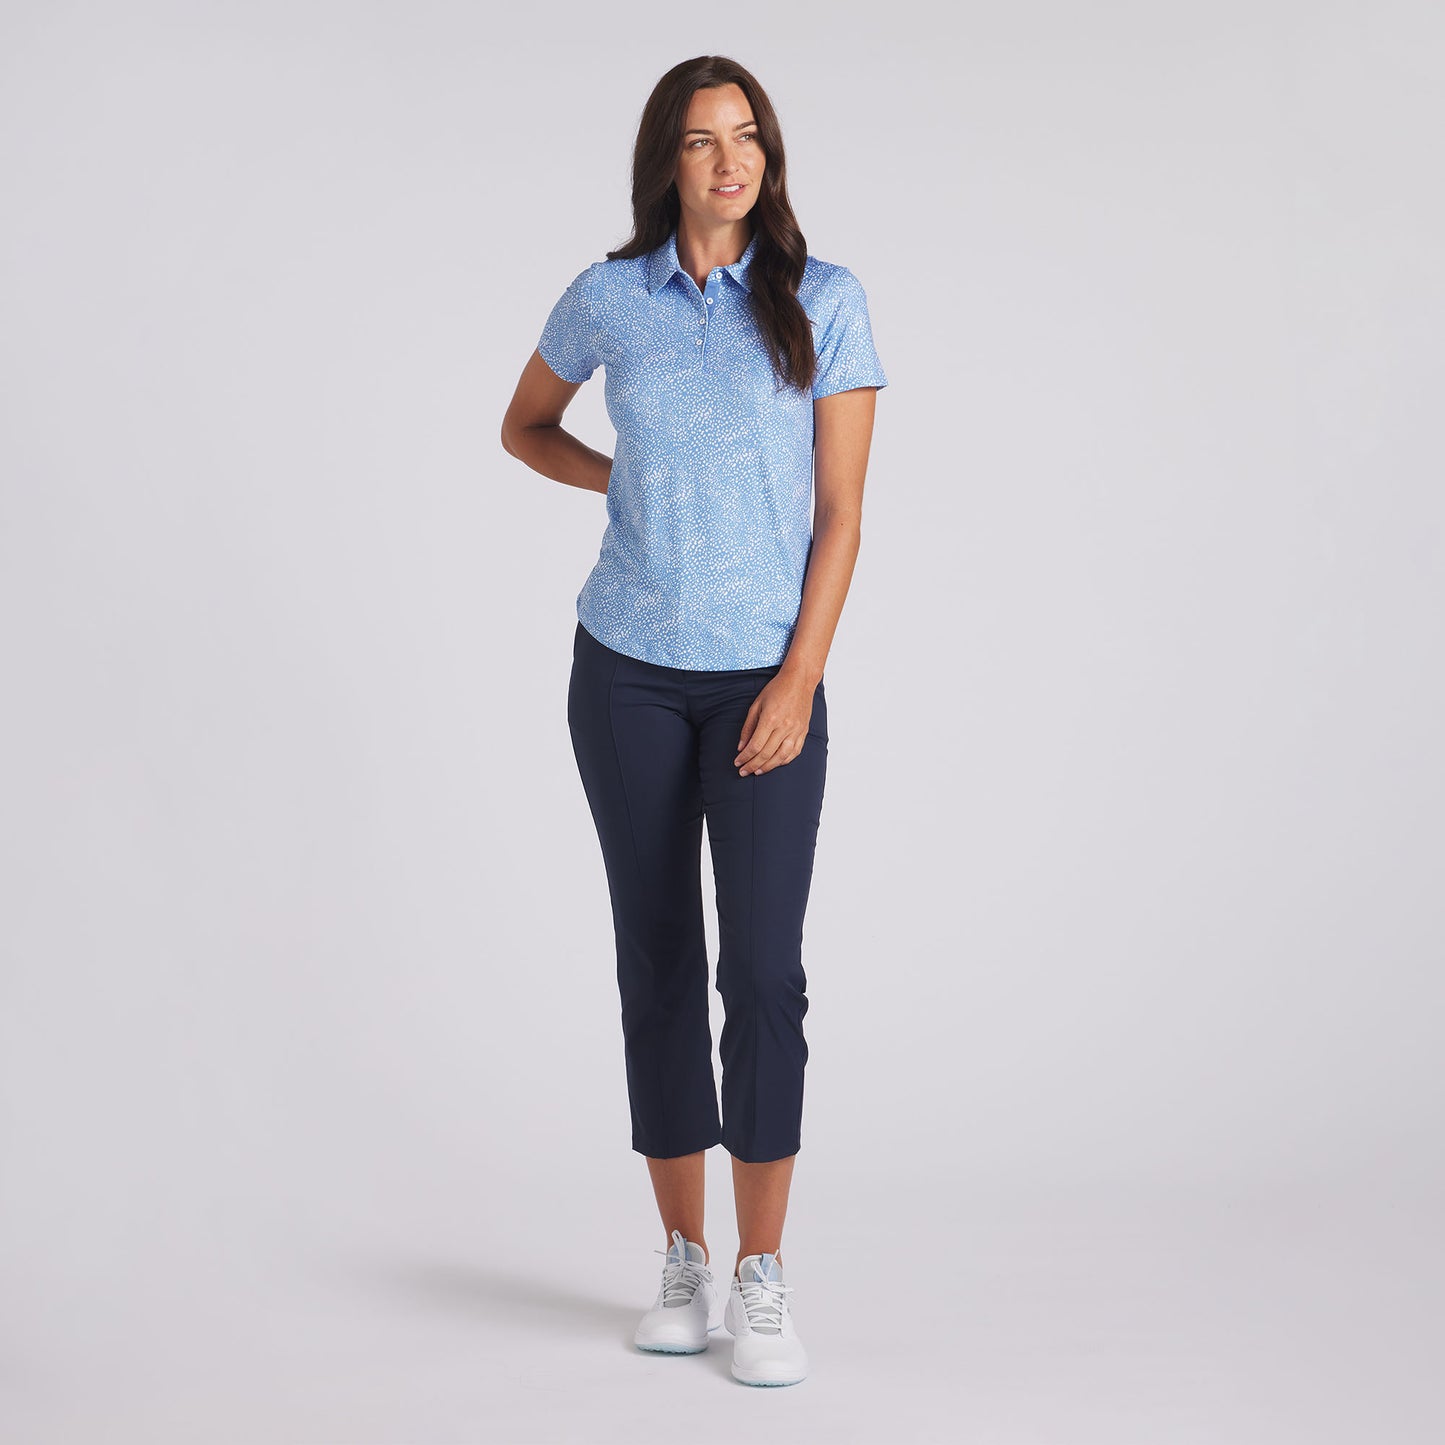 Puma Golf Women's Short Sleeve Polo in Blue Skies-White Glow with Cloudspun